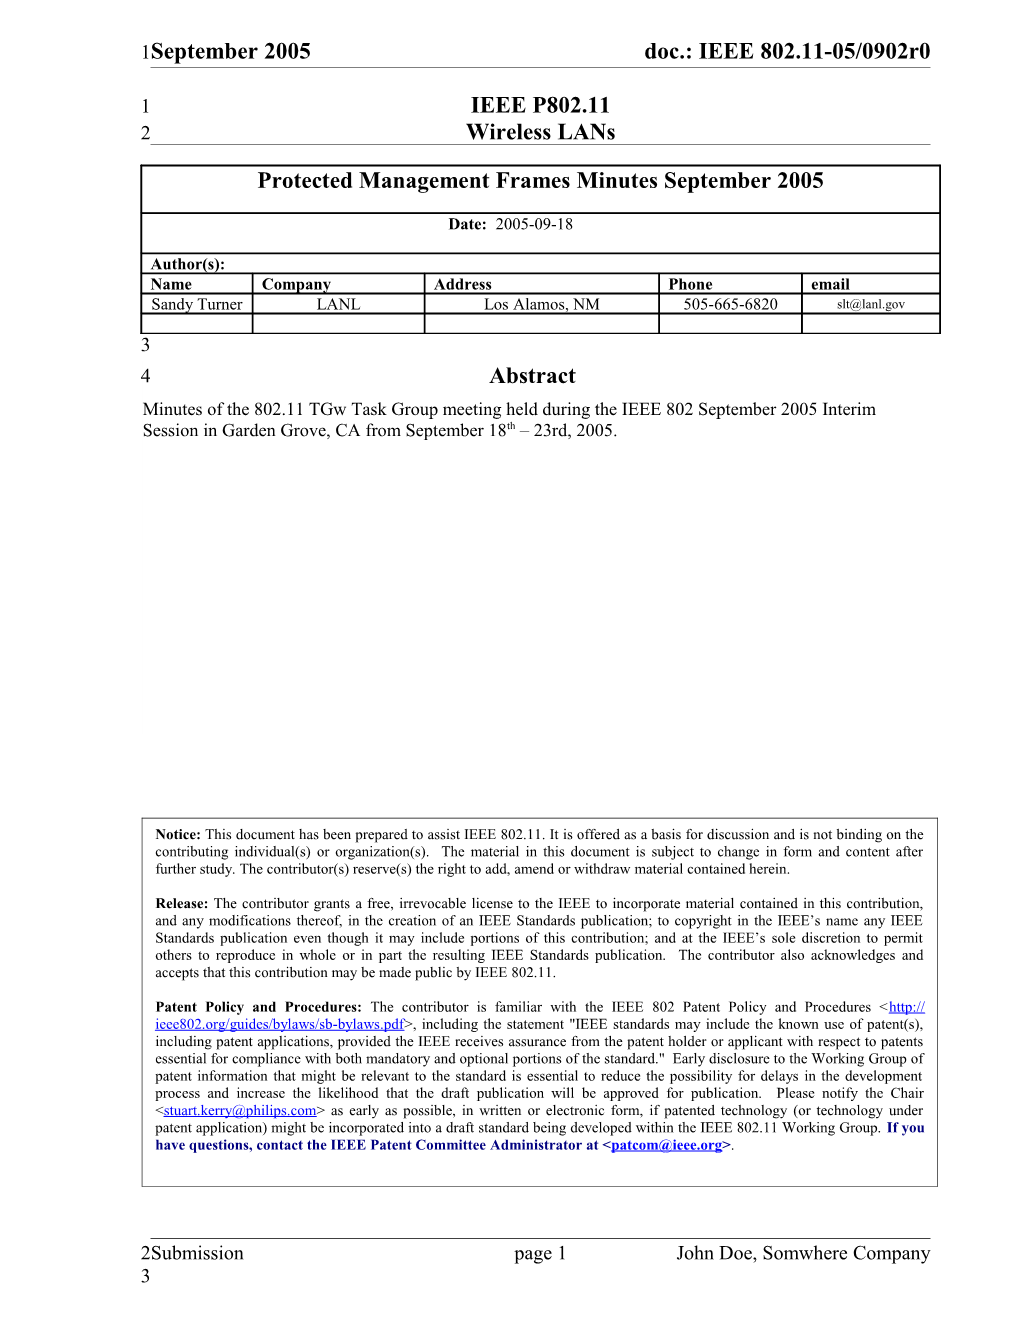 Group: IEEE 802.11 Tgw Protected Management Frames